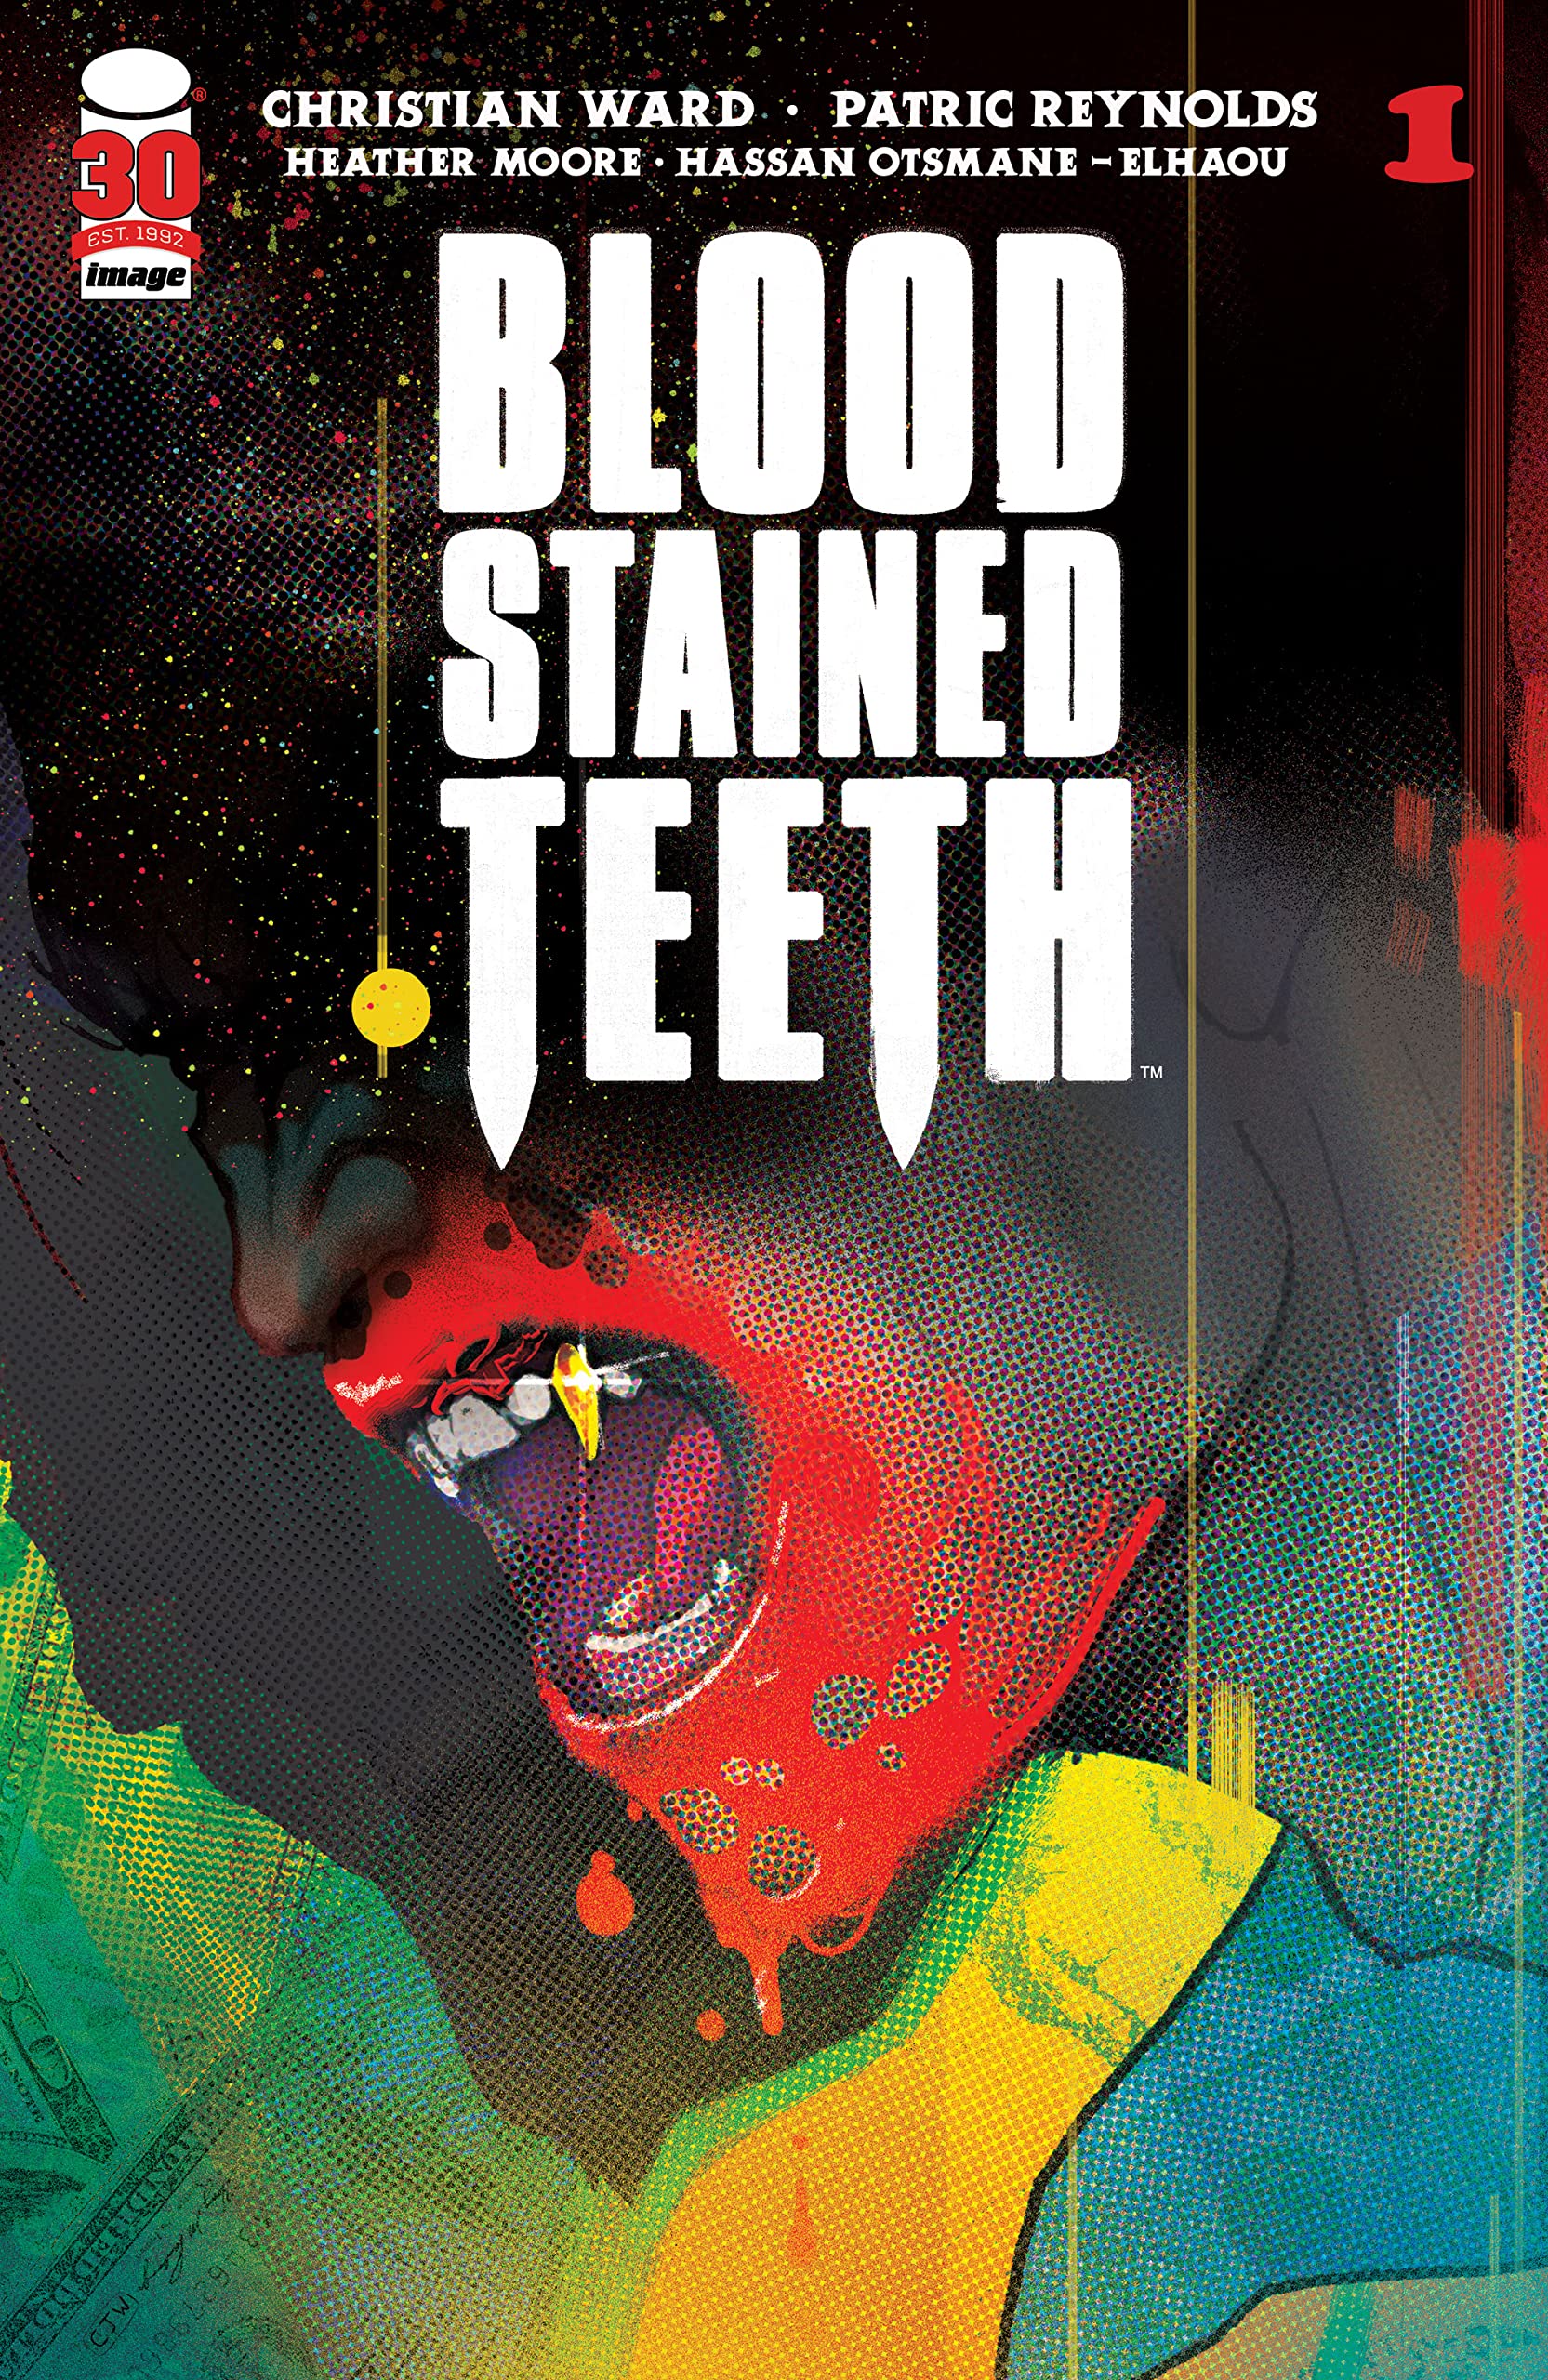 Blood stained teeth